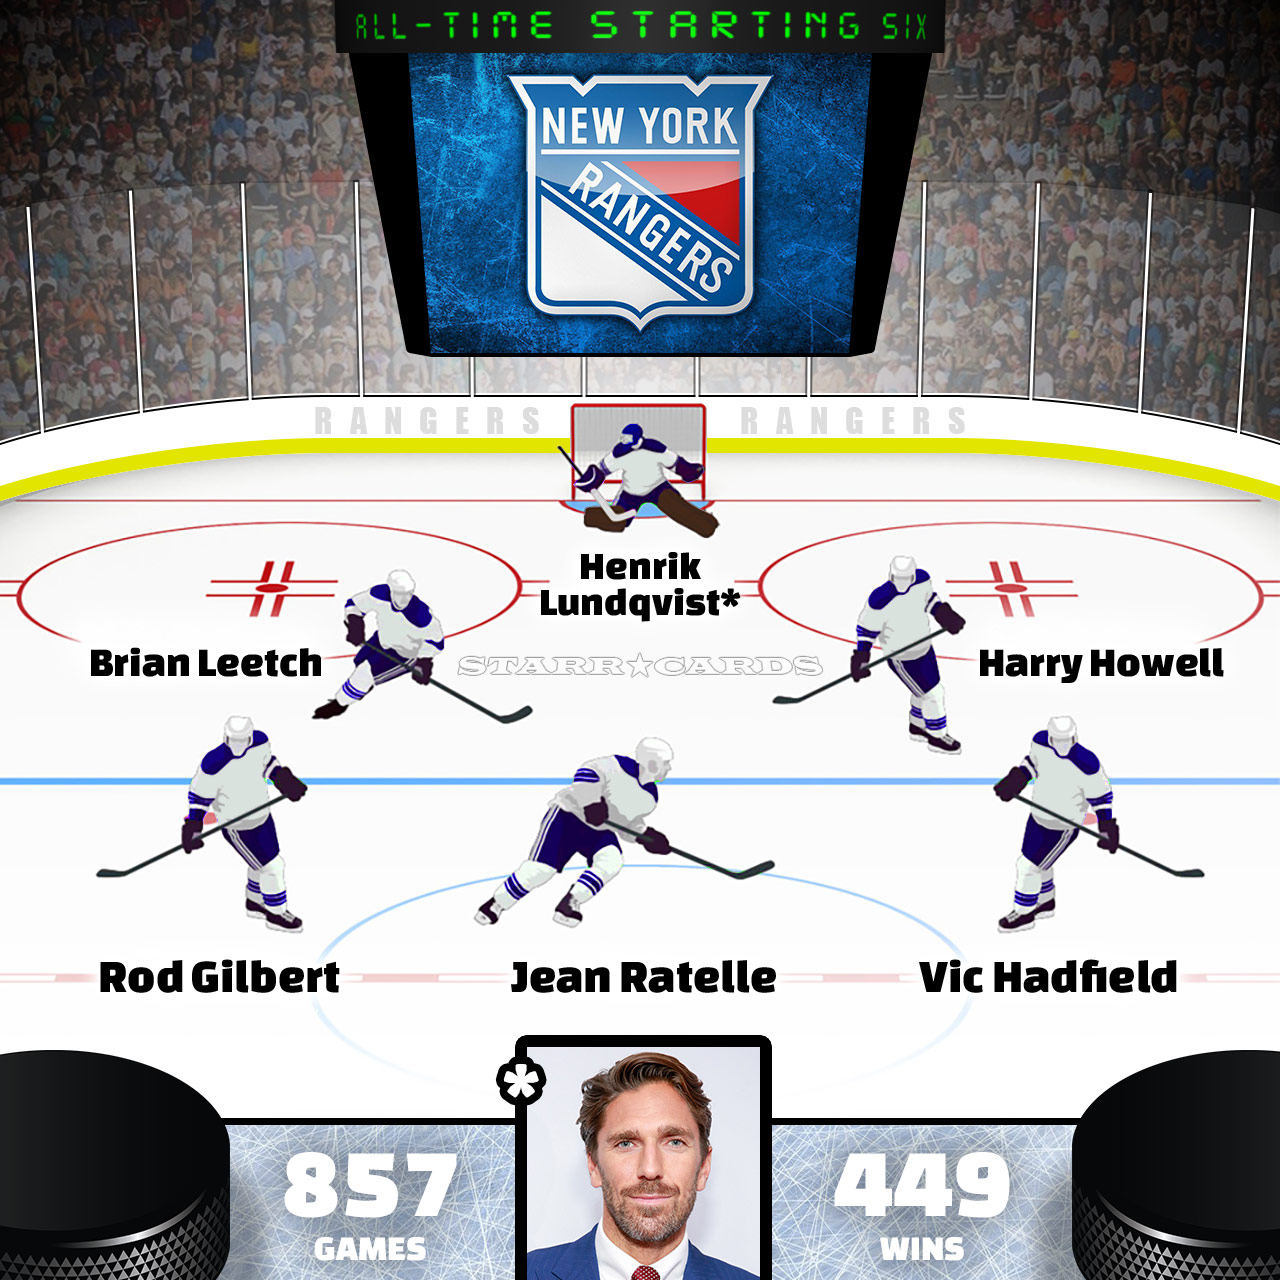 PHOTOS: Rangers' Lundqvist 10th all time in wins